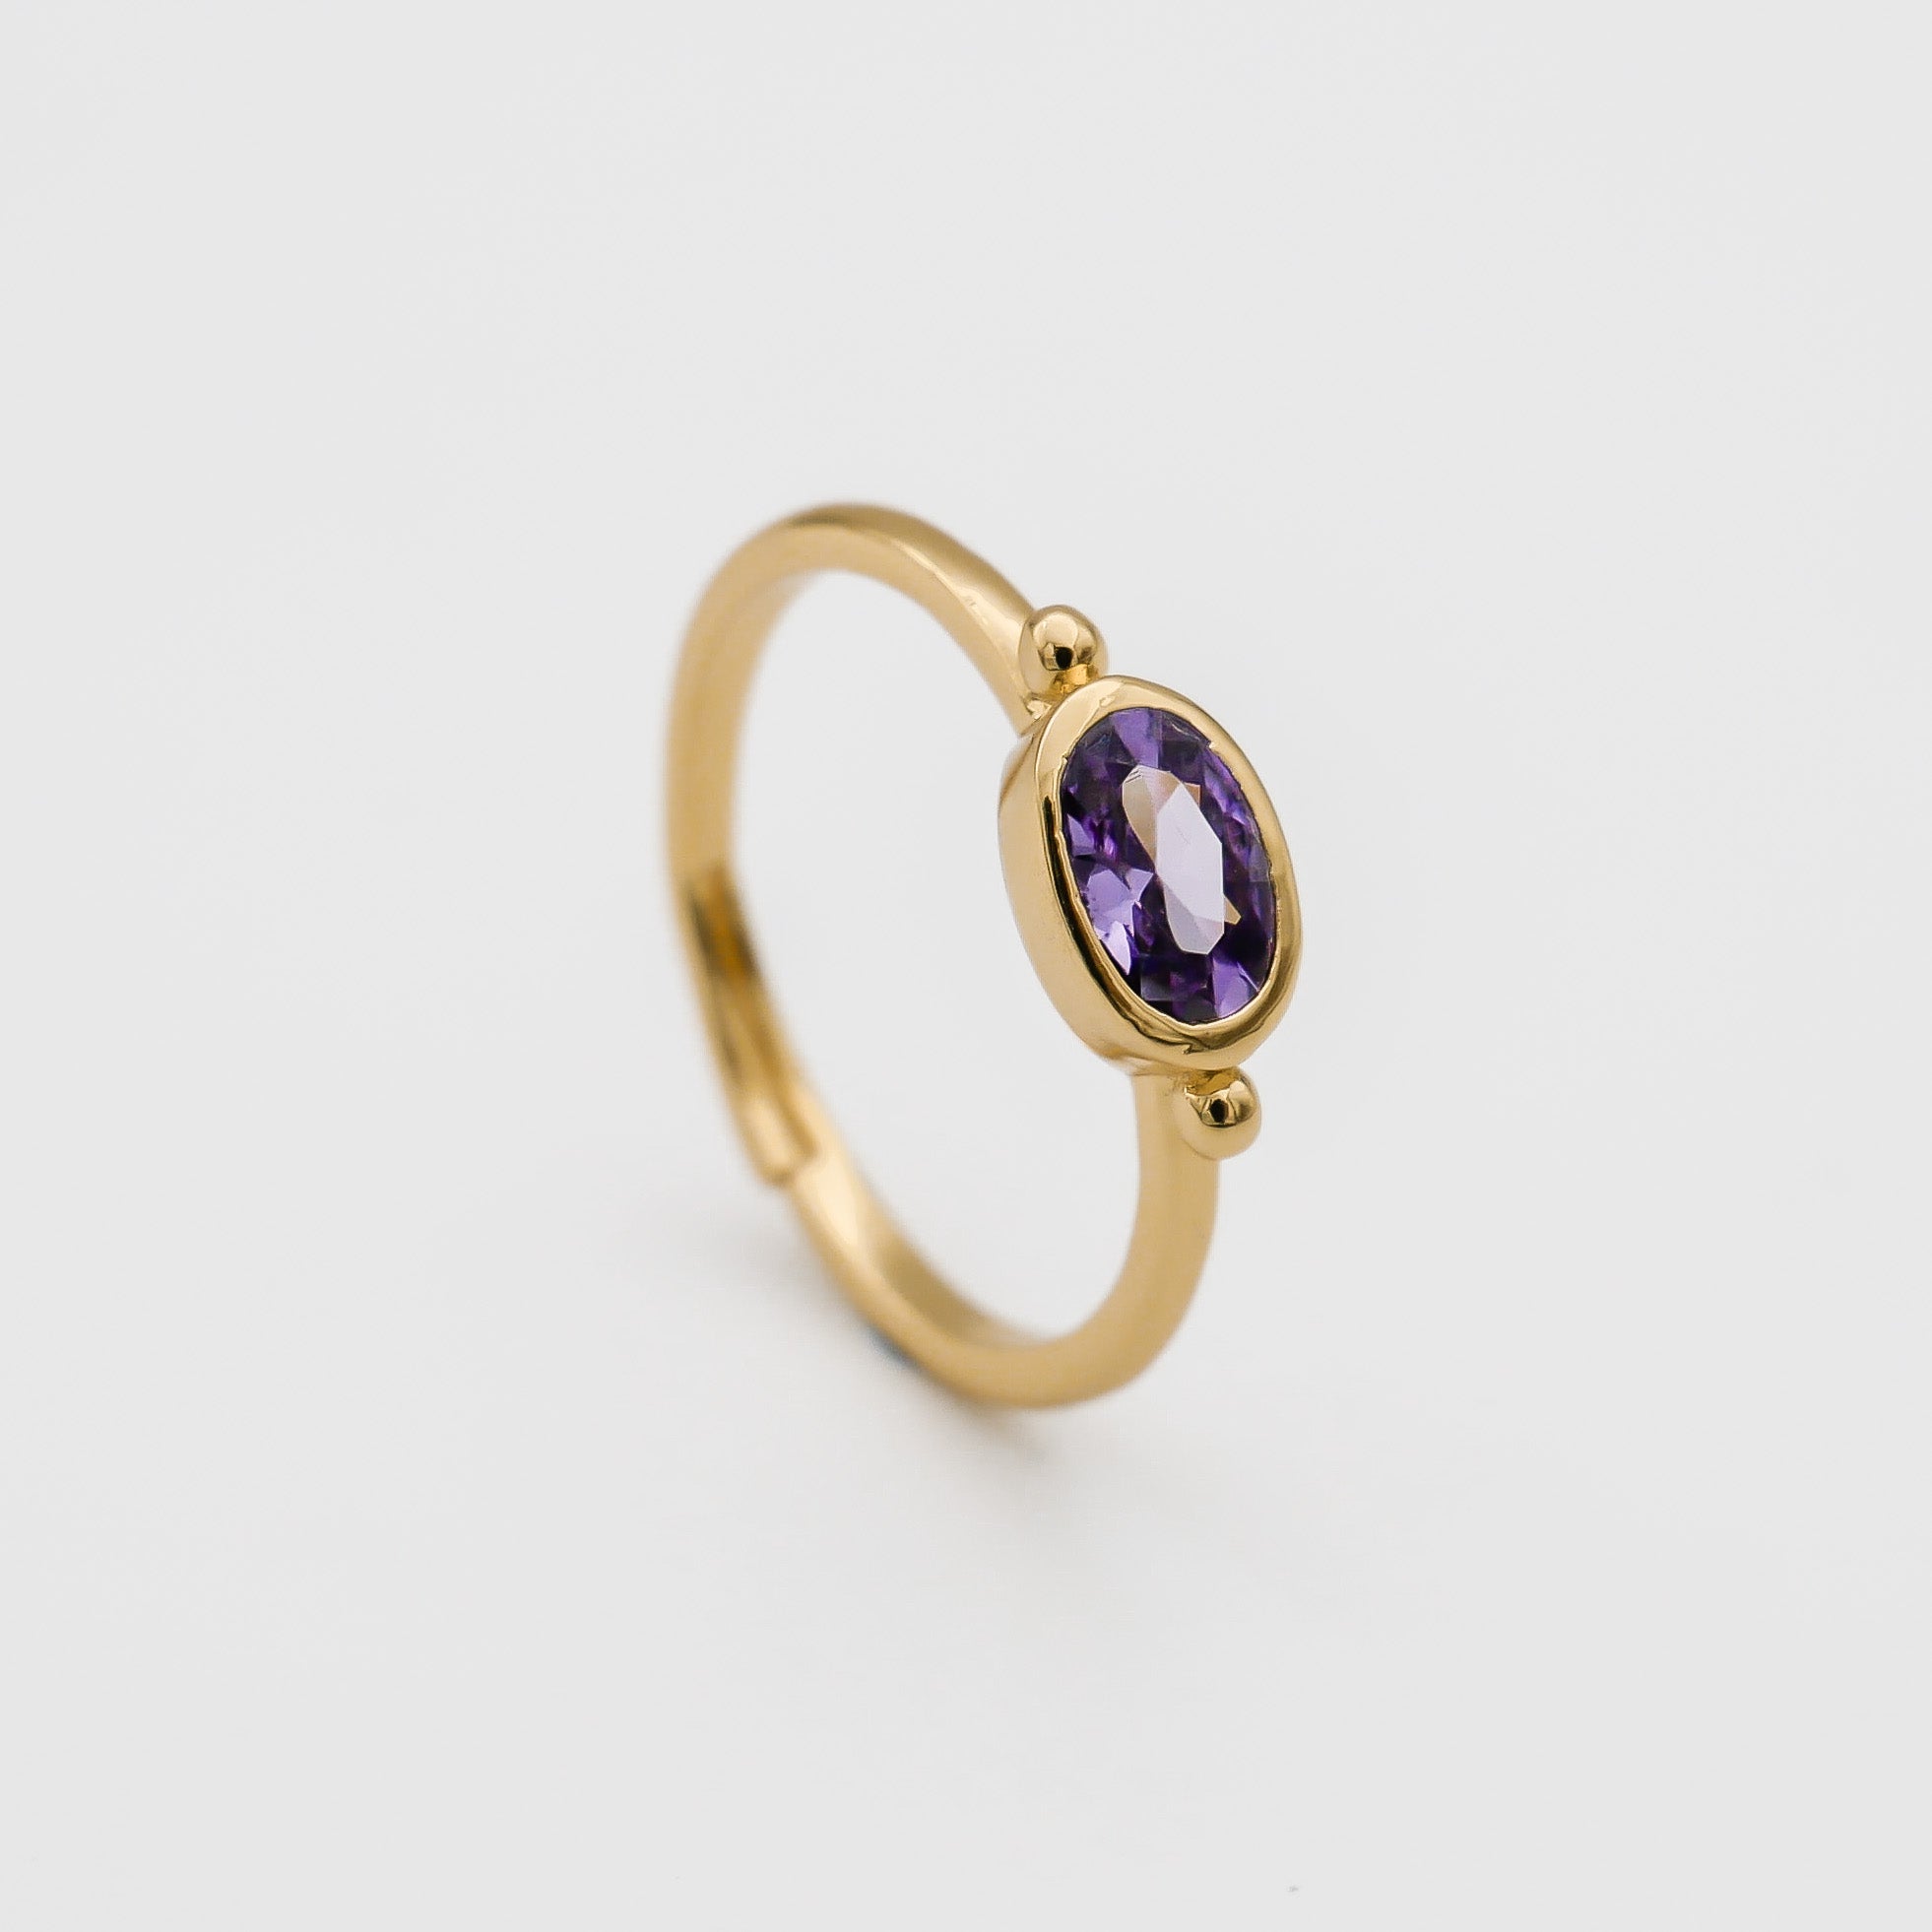 Birthstone ring gold for February with amethyst